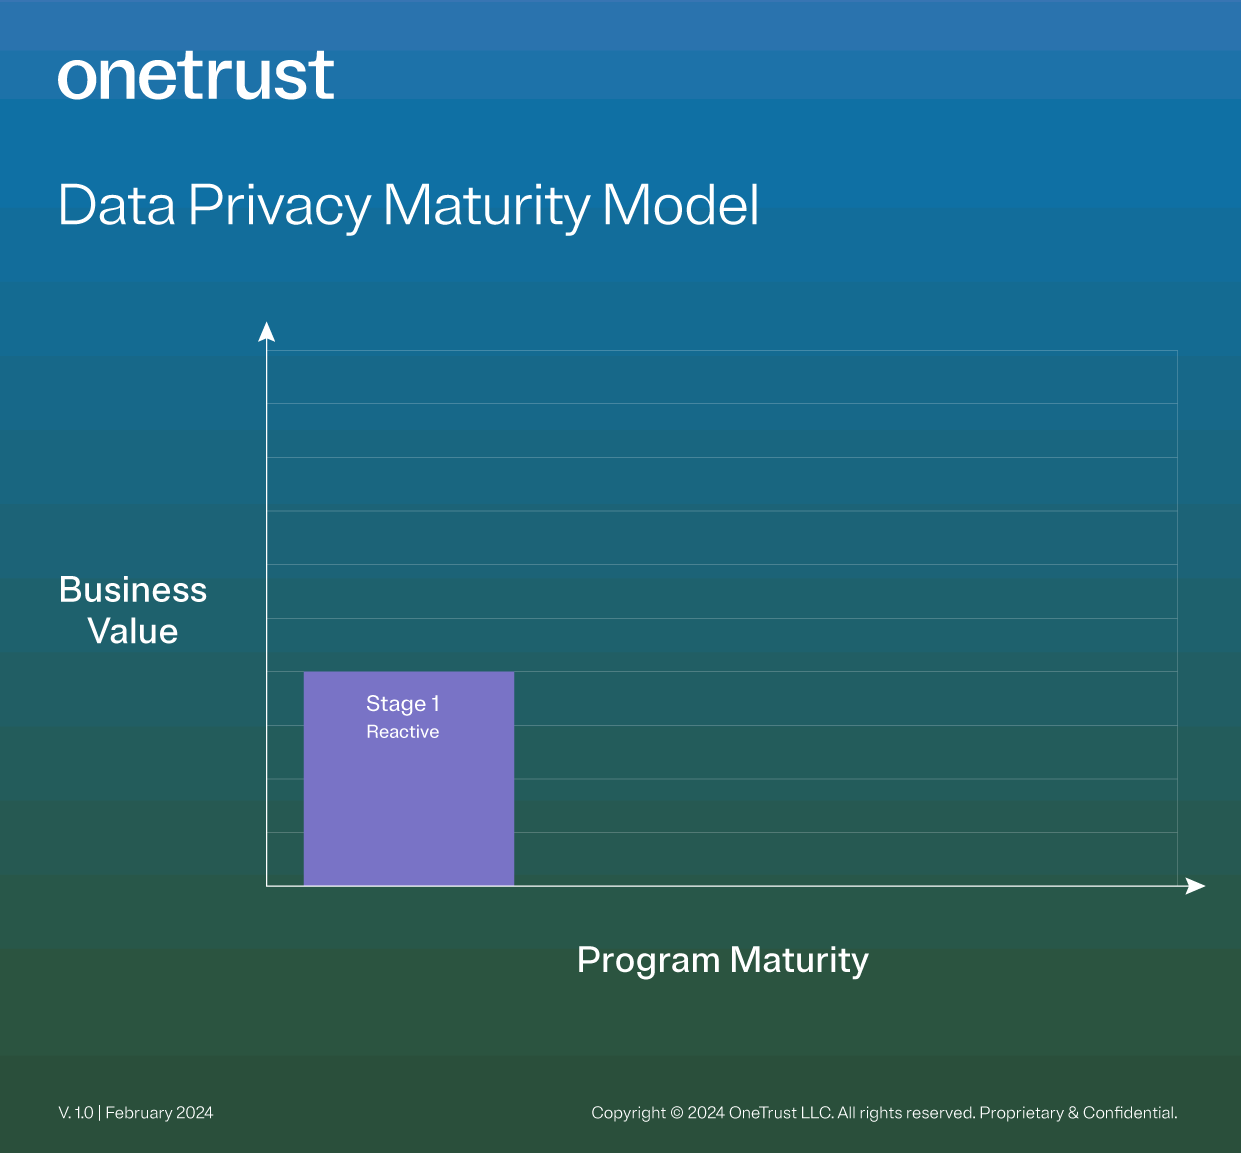 Bar graph showing the relationship between the first maturity stage of a data privacy program and their business value.